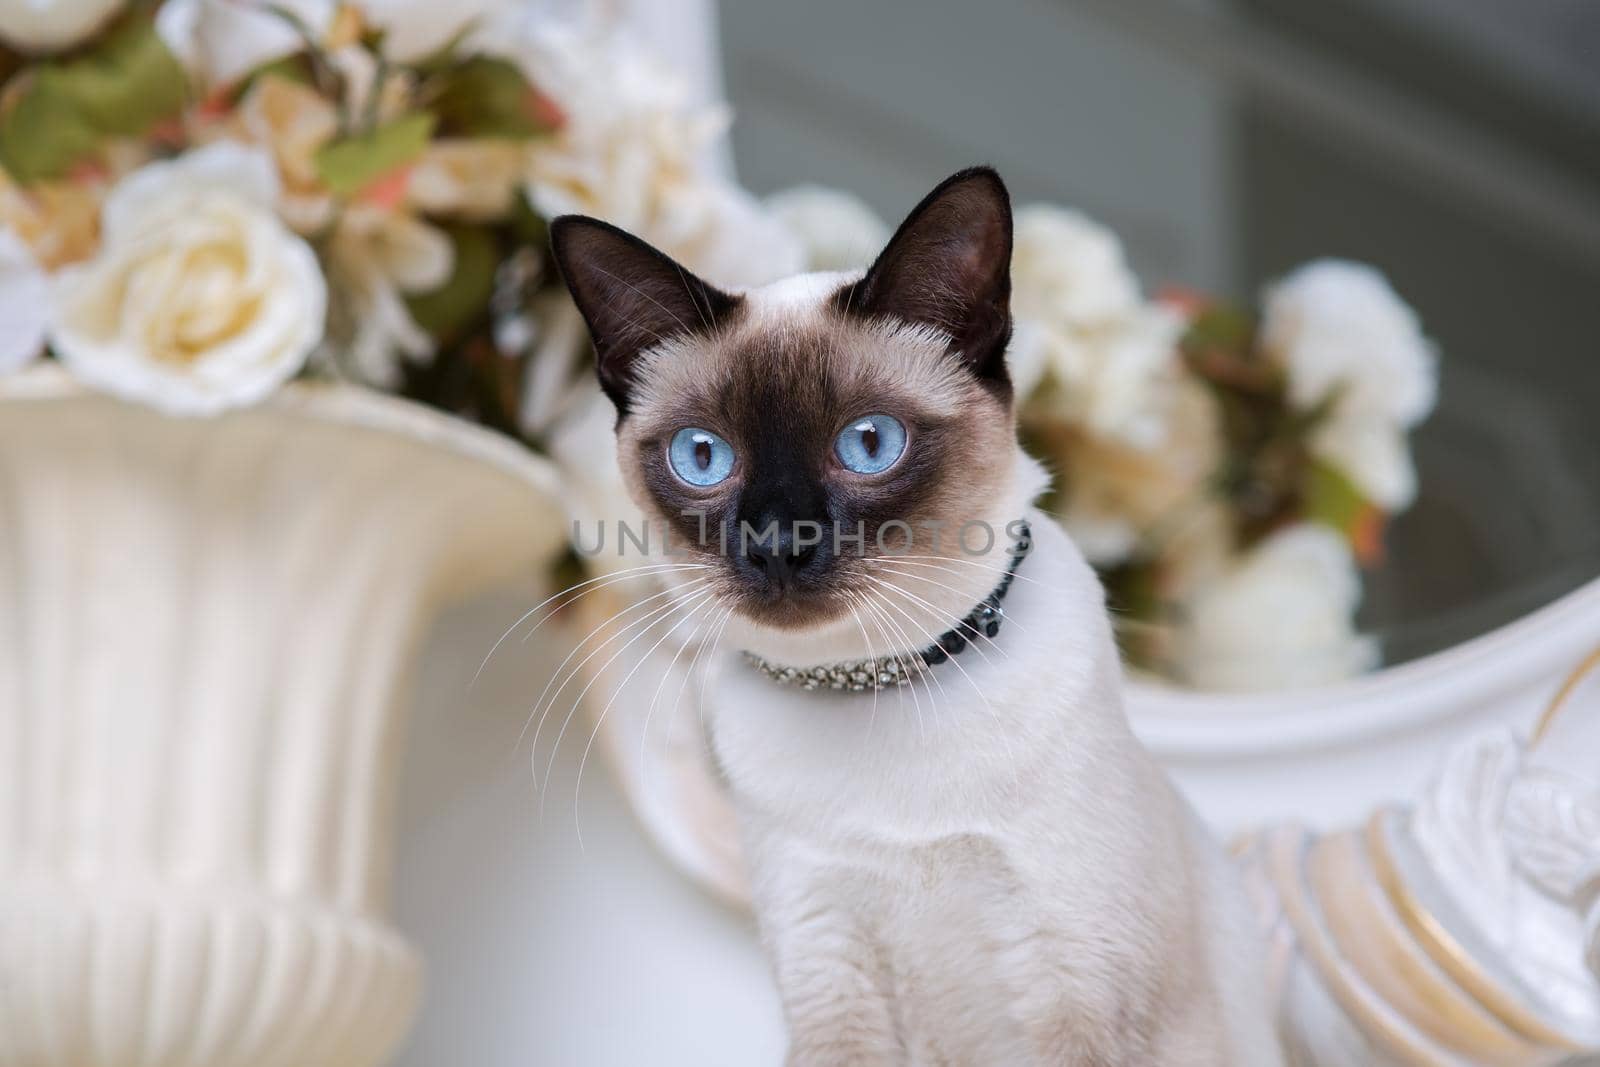 two color cat without tail Mekong Bobtail breed with jewel precious necklace of pearls around neck. Cat And necklace. Blue eyed Female Cat of Breed Mekong Bobtail, Sitting with gems on the neck by Tomashevska